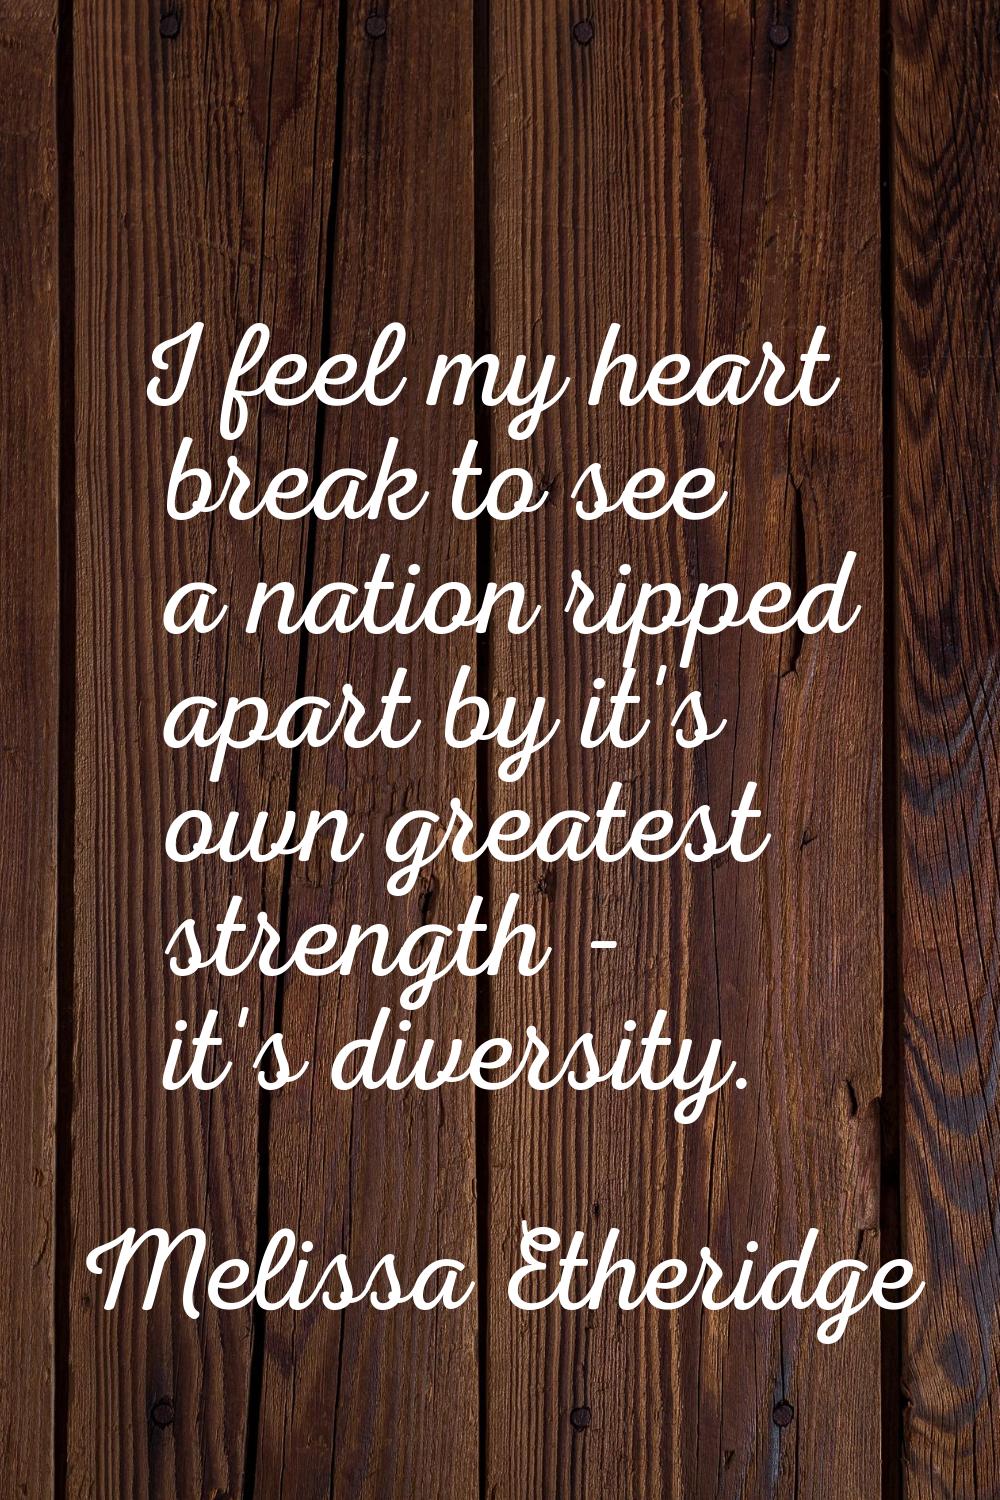 I feel my heart break to see a nation ripped apart by it's own greatest strength - it's diversity.